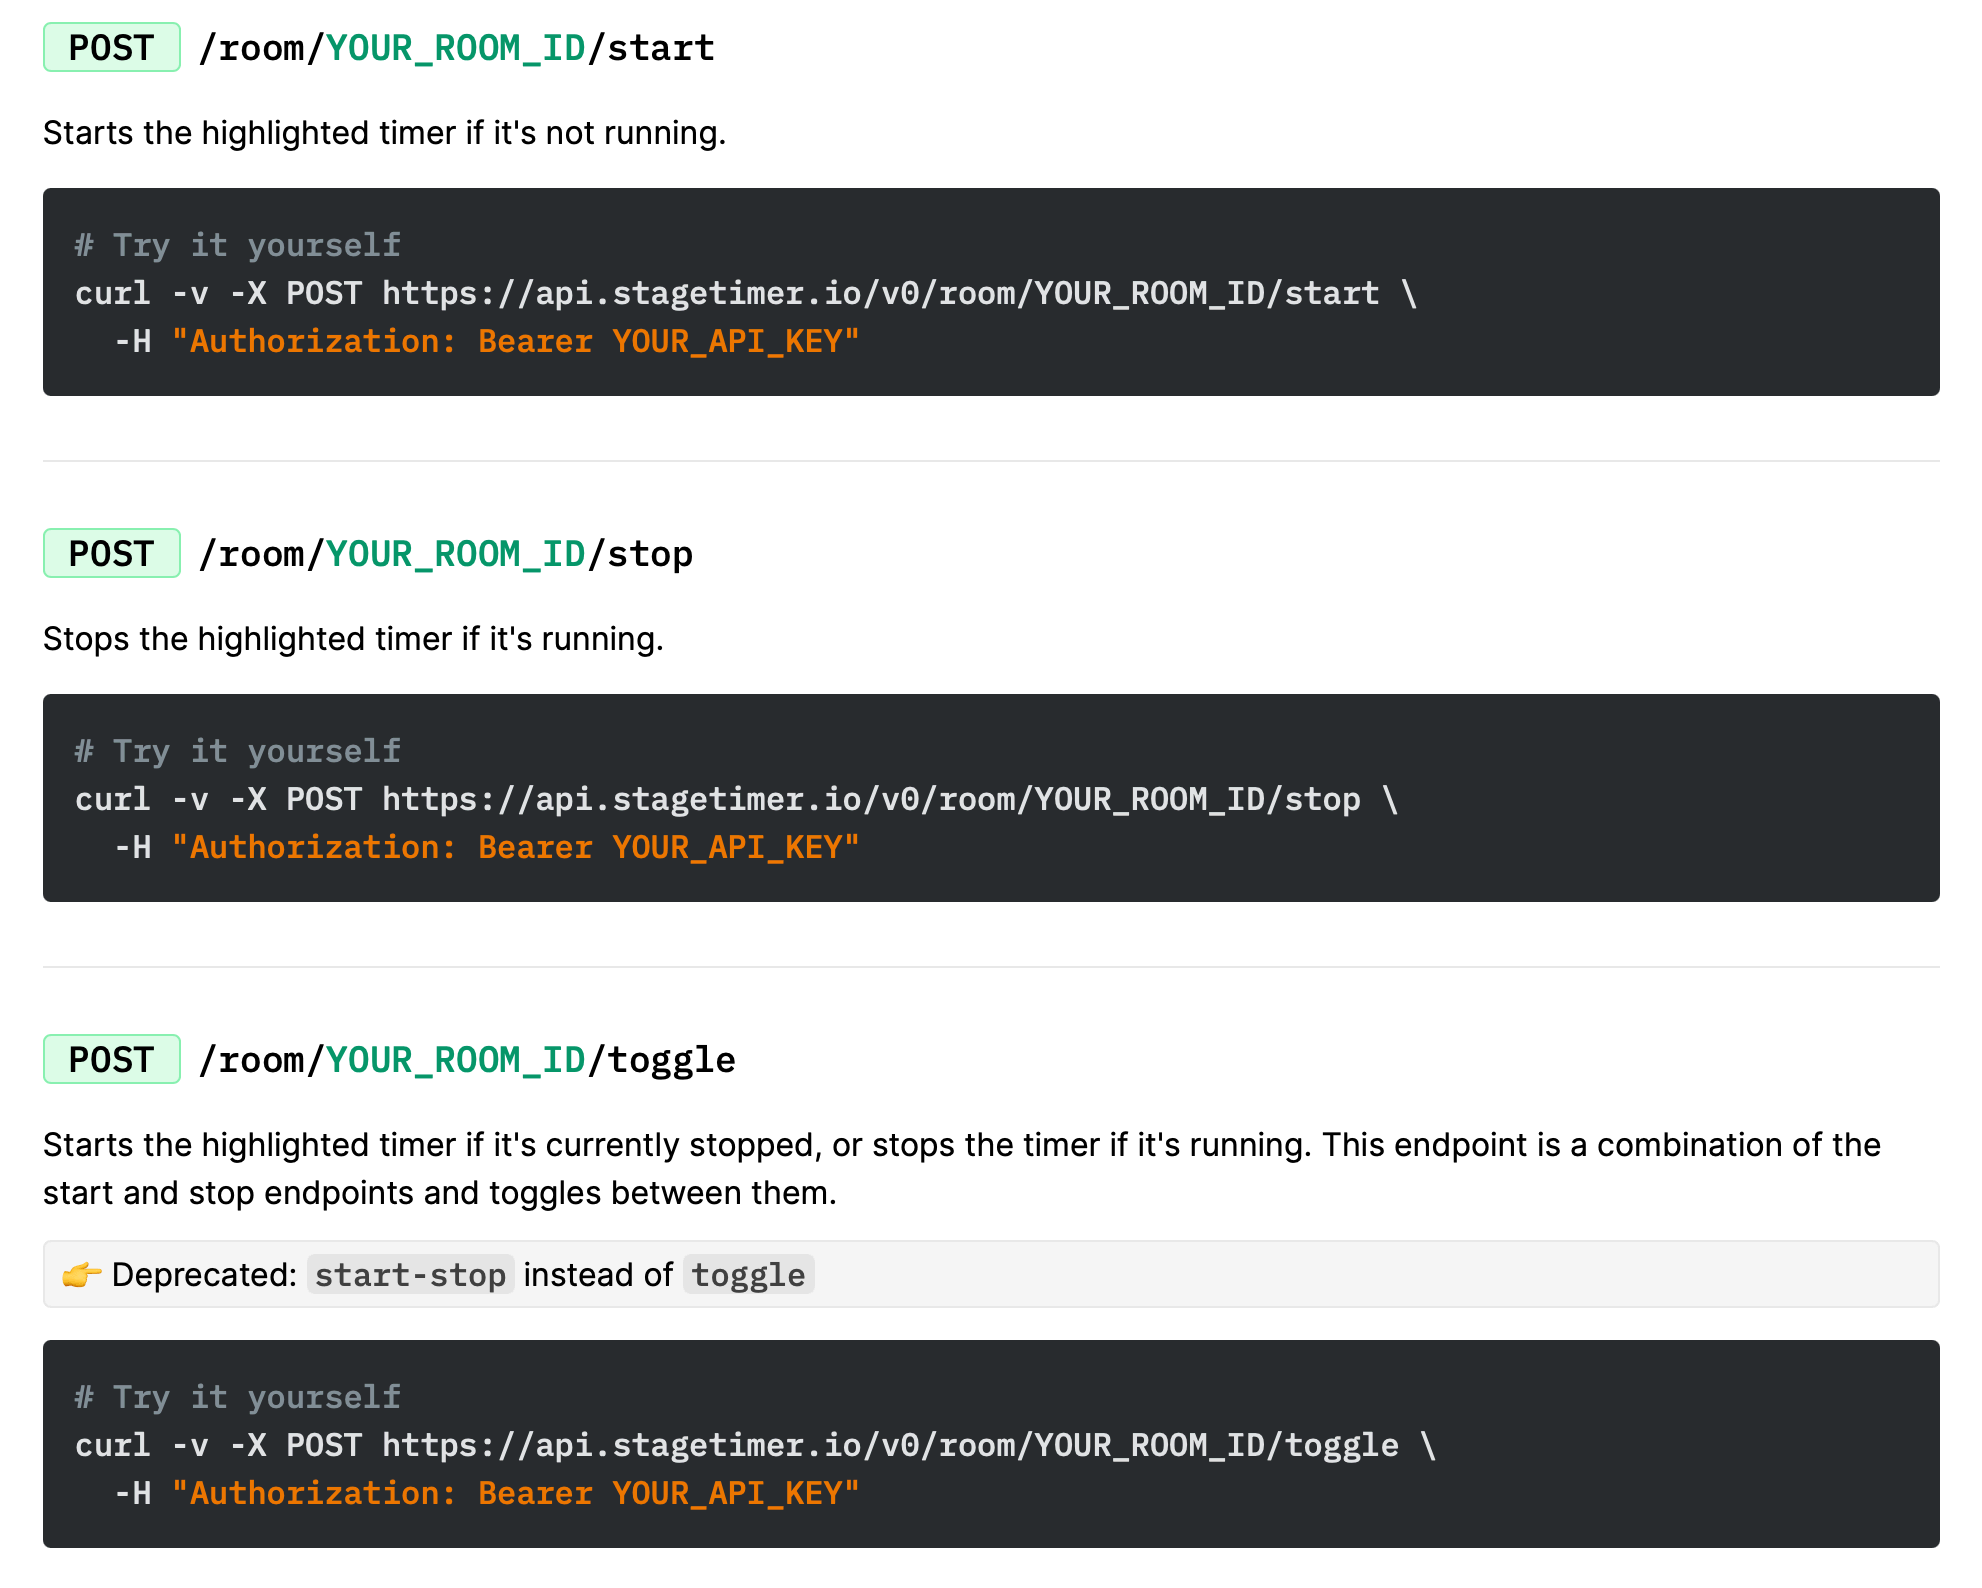 See the complete documentation on https://stagetimer.io/docs/api/